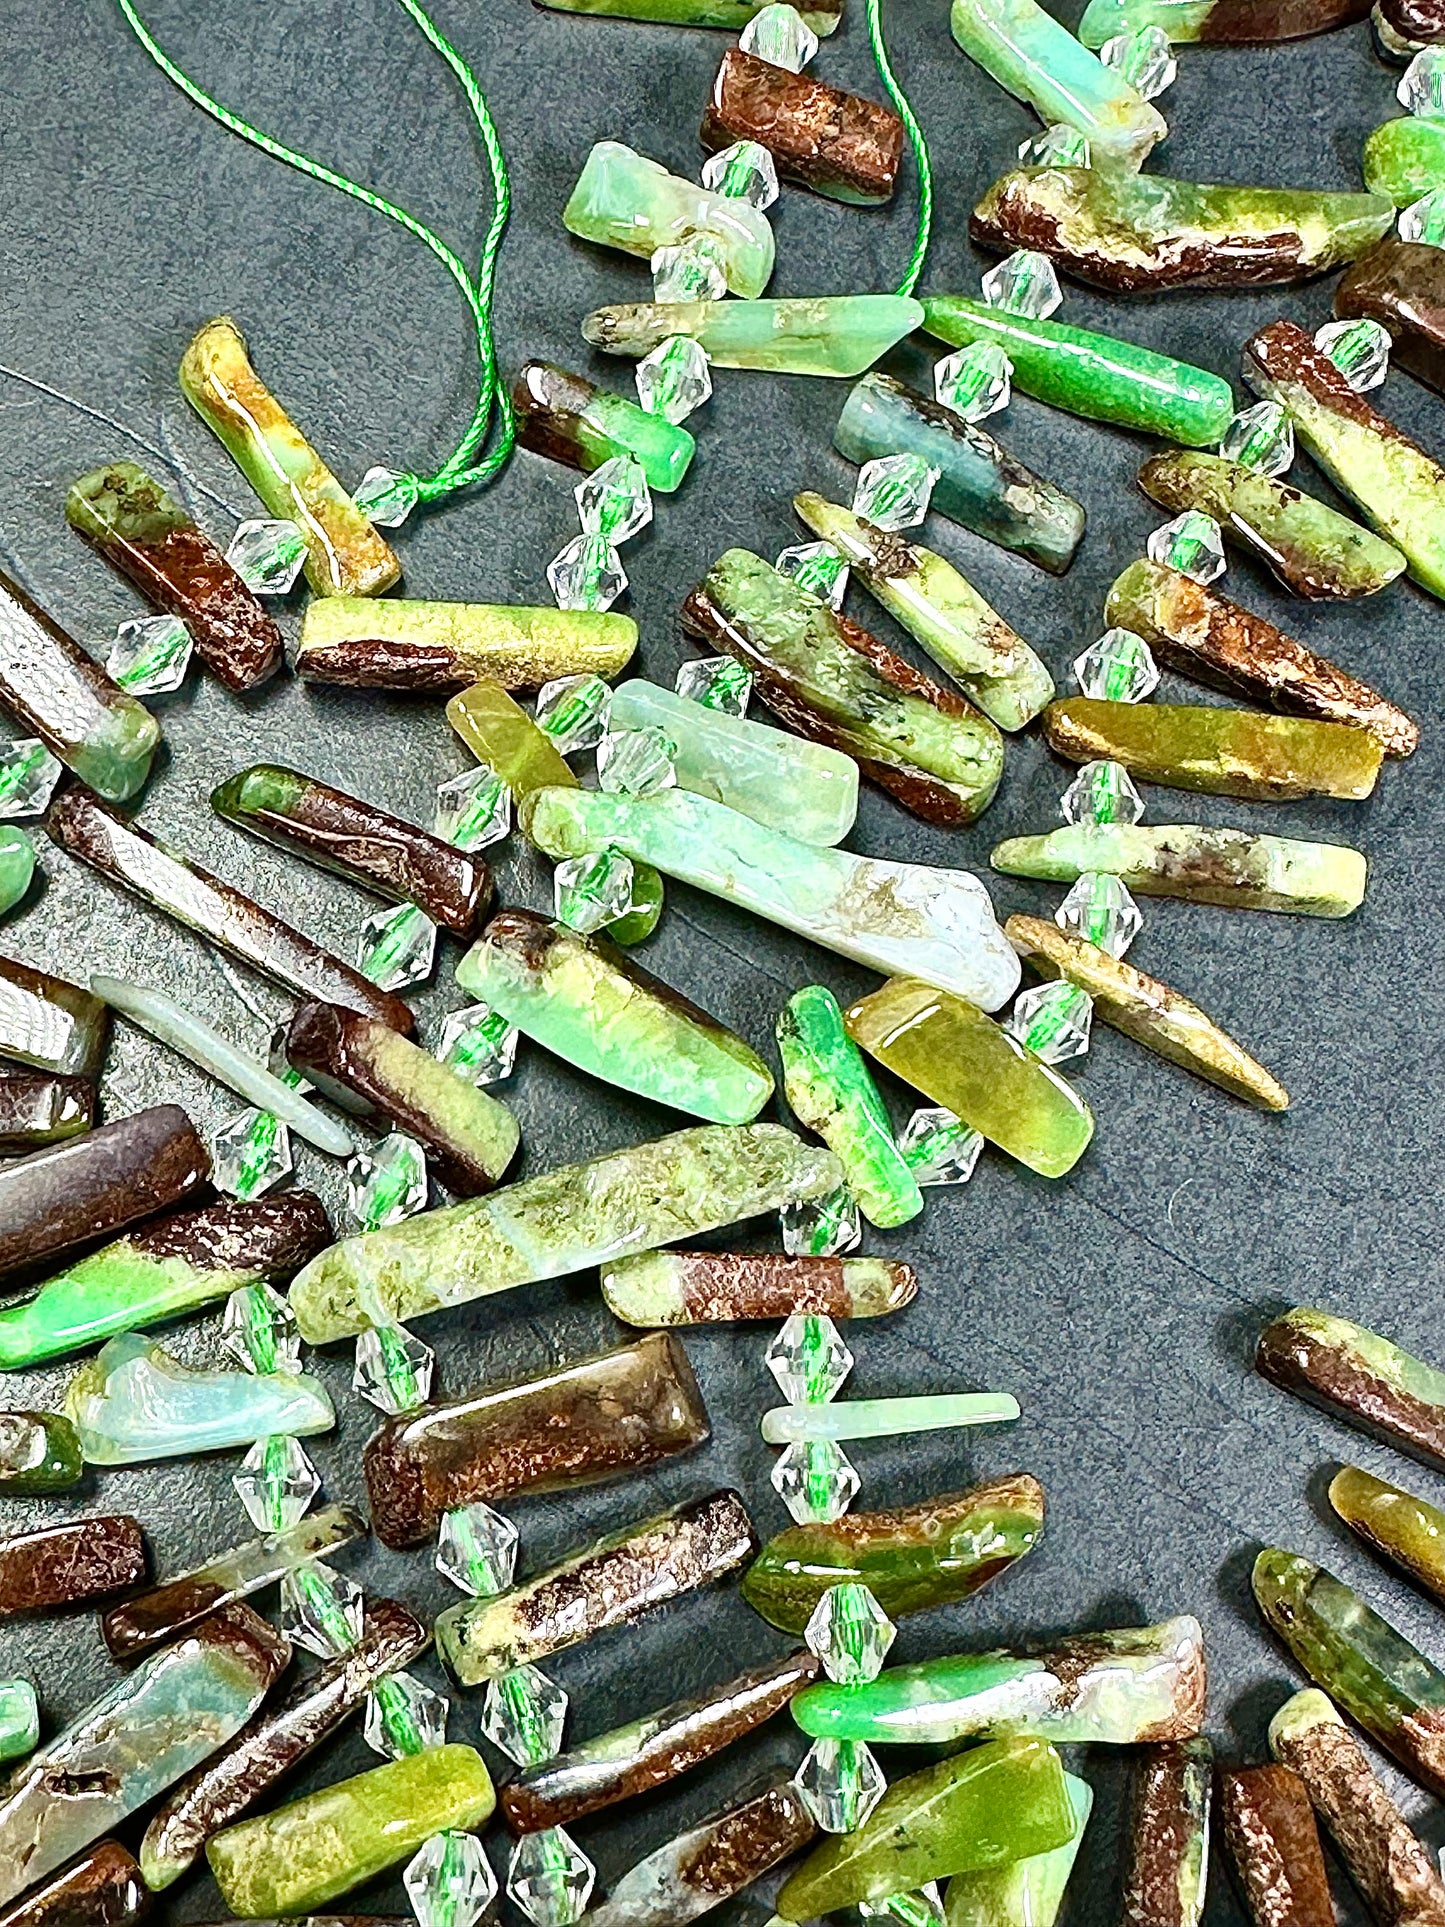 NATURAL Chrysoprase Gemstone Bead 10x4mm to 30x7mm Stick Shape, Gorgeous Green Brown Color Beads Great Quality Full Strand 15.5"